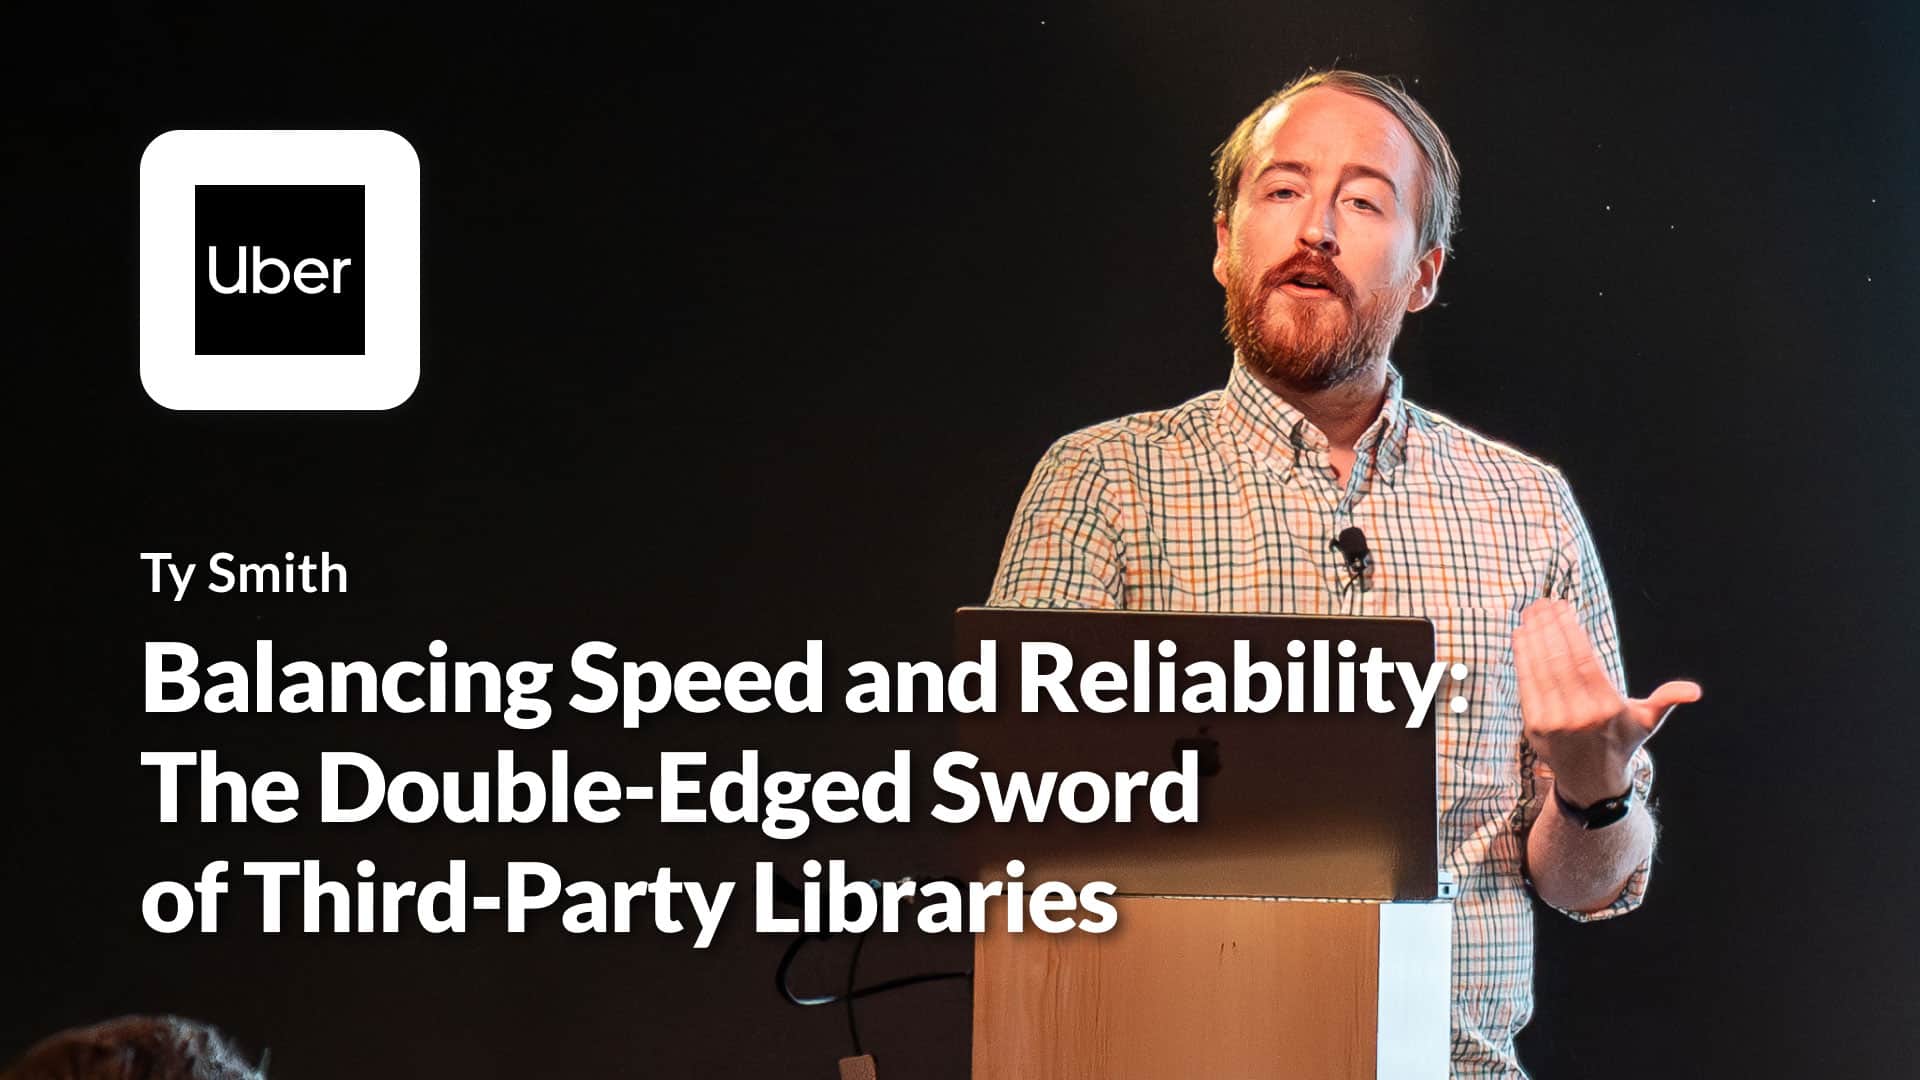 Balancing Speed and Reliability: The Double-Edged Sword of Third-Party Libraries